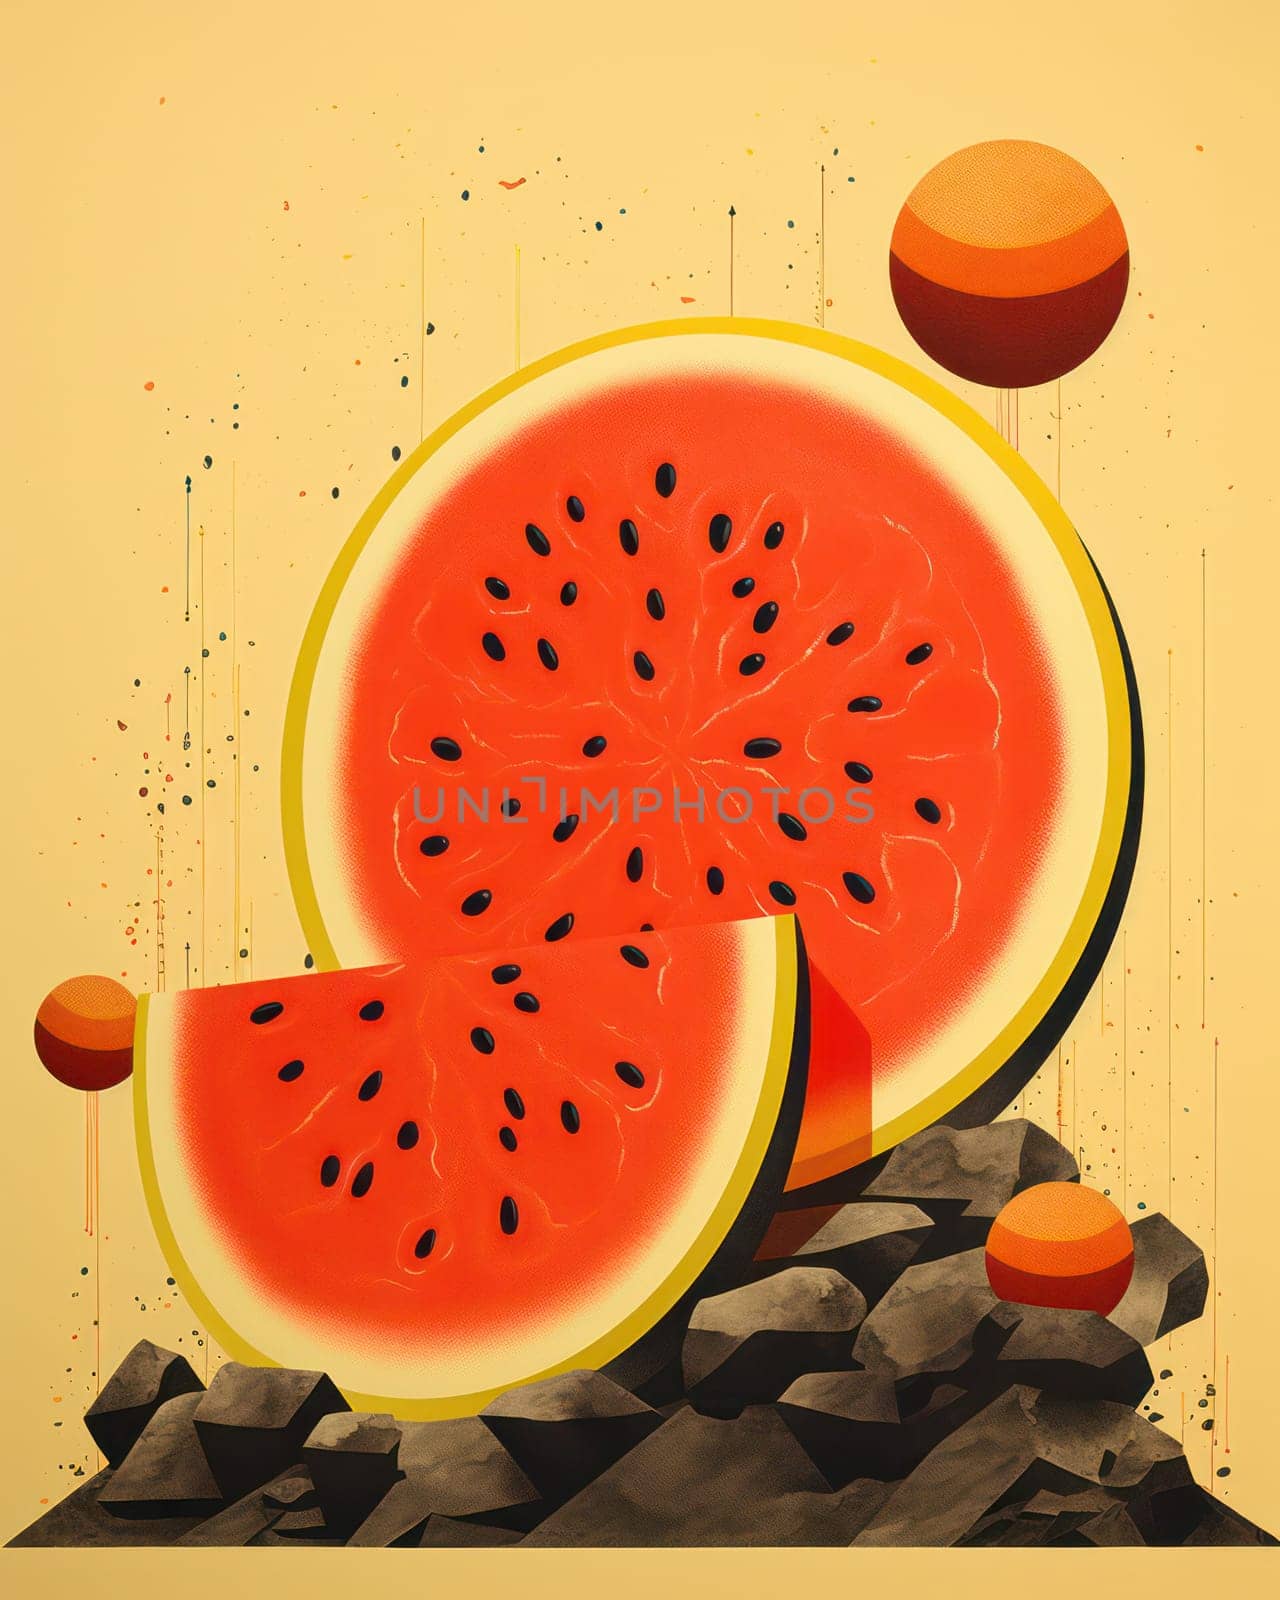 Juicy Slice of Fresh Summer Watermelon on Organic Red Background: A Tangy and Sweet Delight by Vichizh